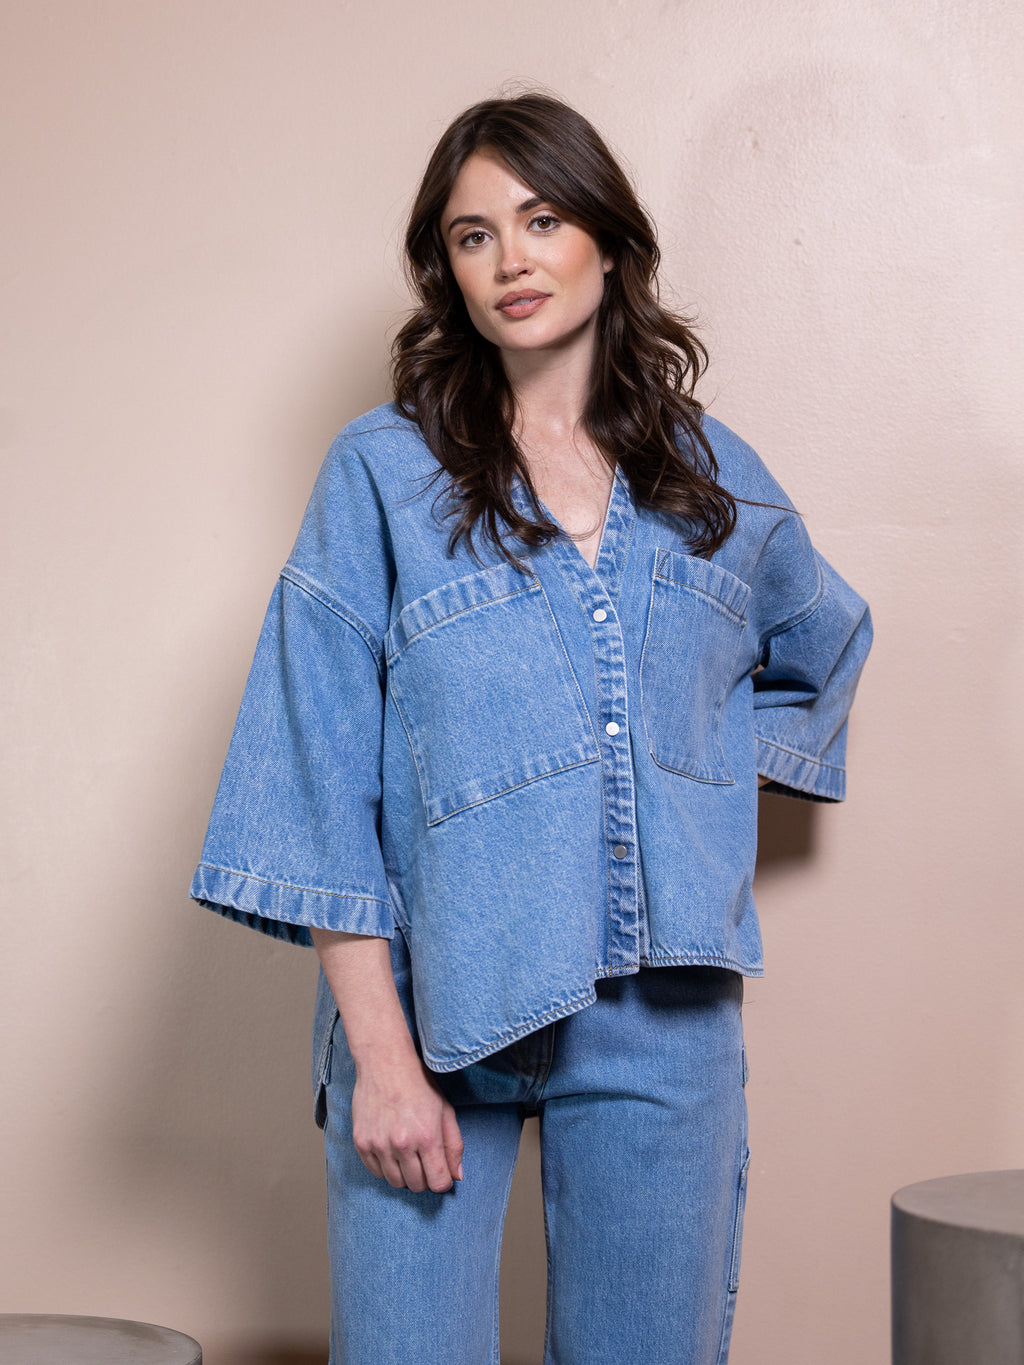 Woman in denim button up and blue jeans against pink background